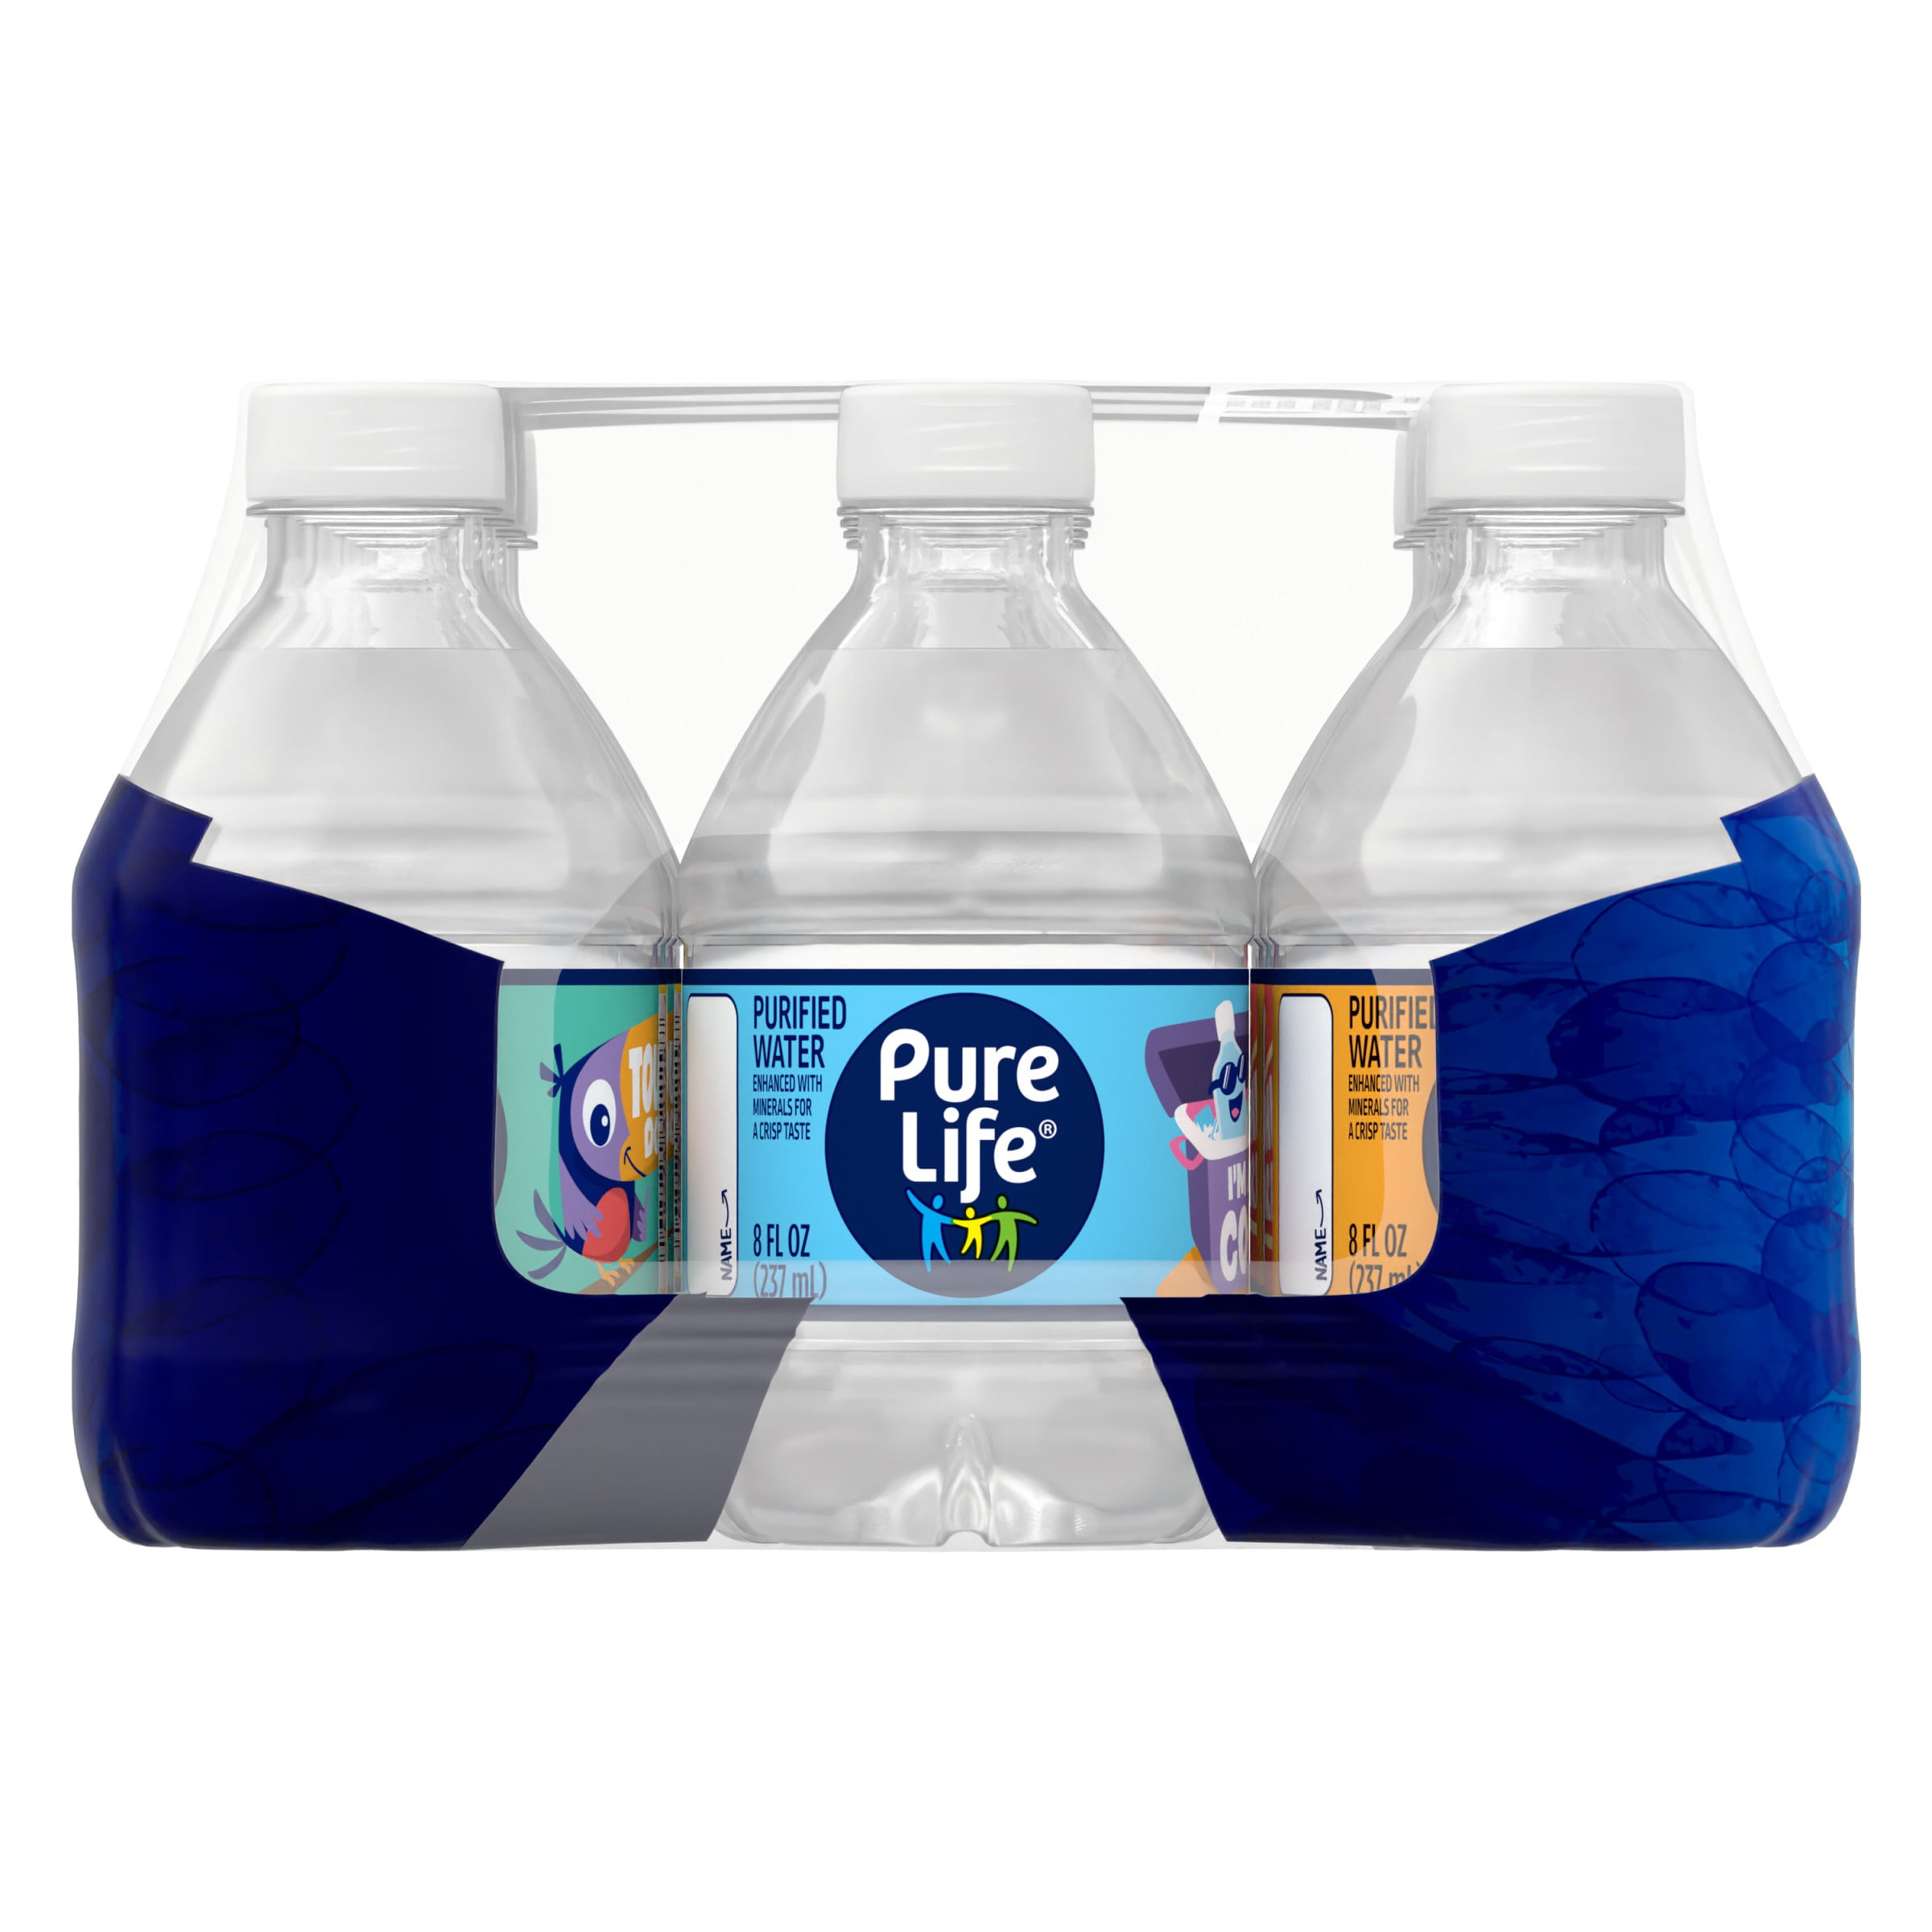 12 Pack Pure Life Purified Water, 8 fl oz